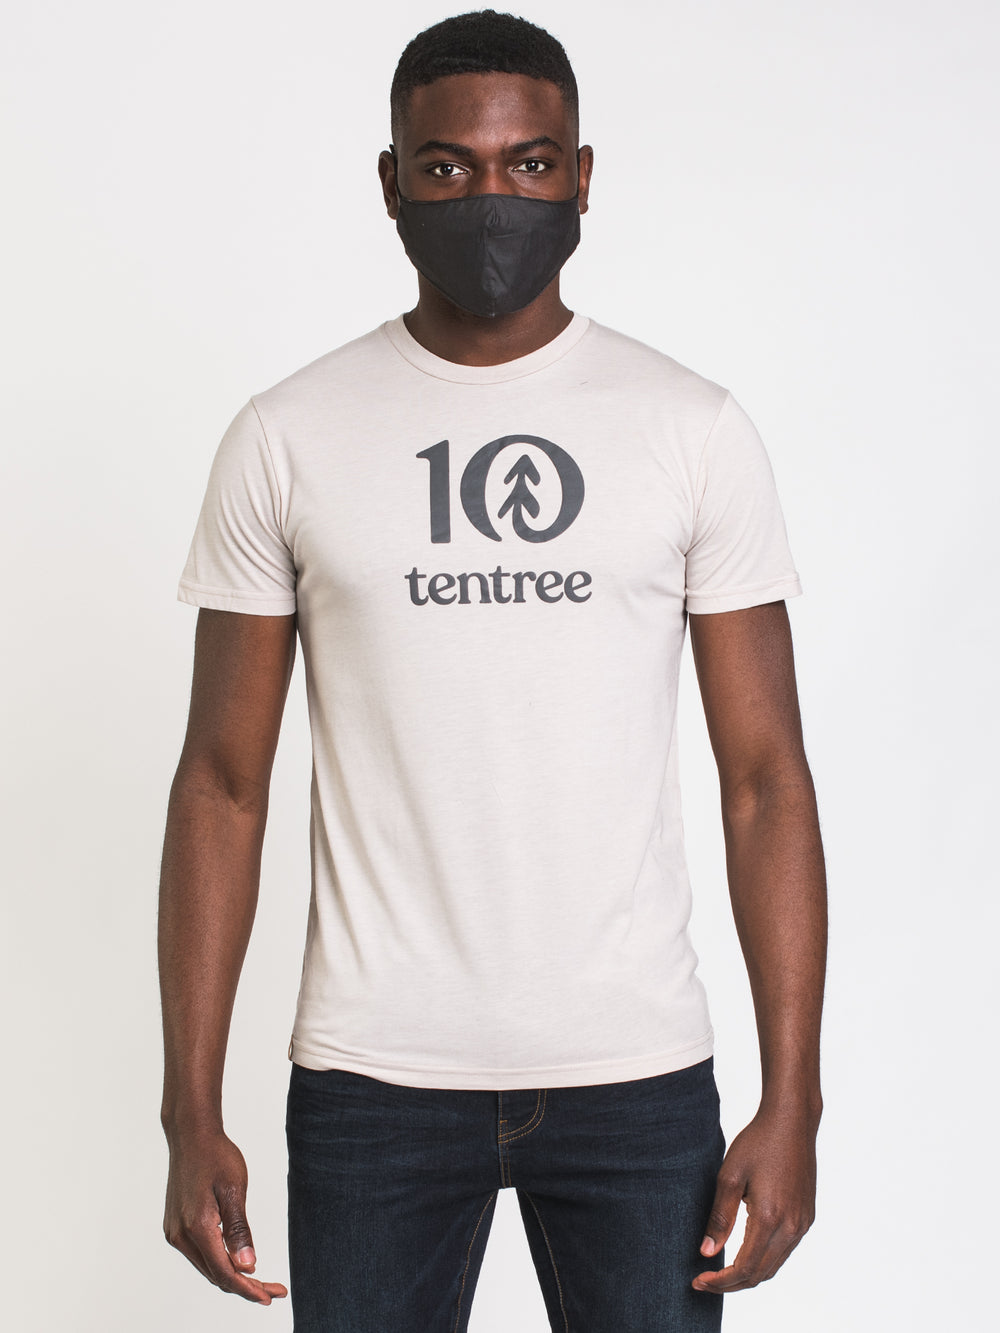 TENTREE LOGO CL PUFF T-SHIRT  - CLEARANCE